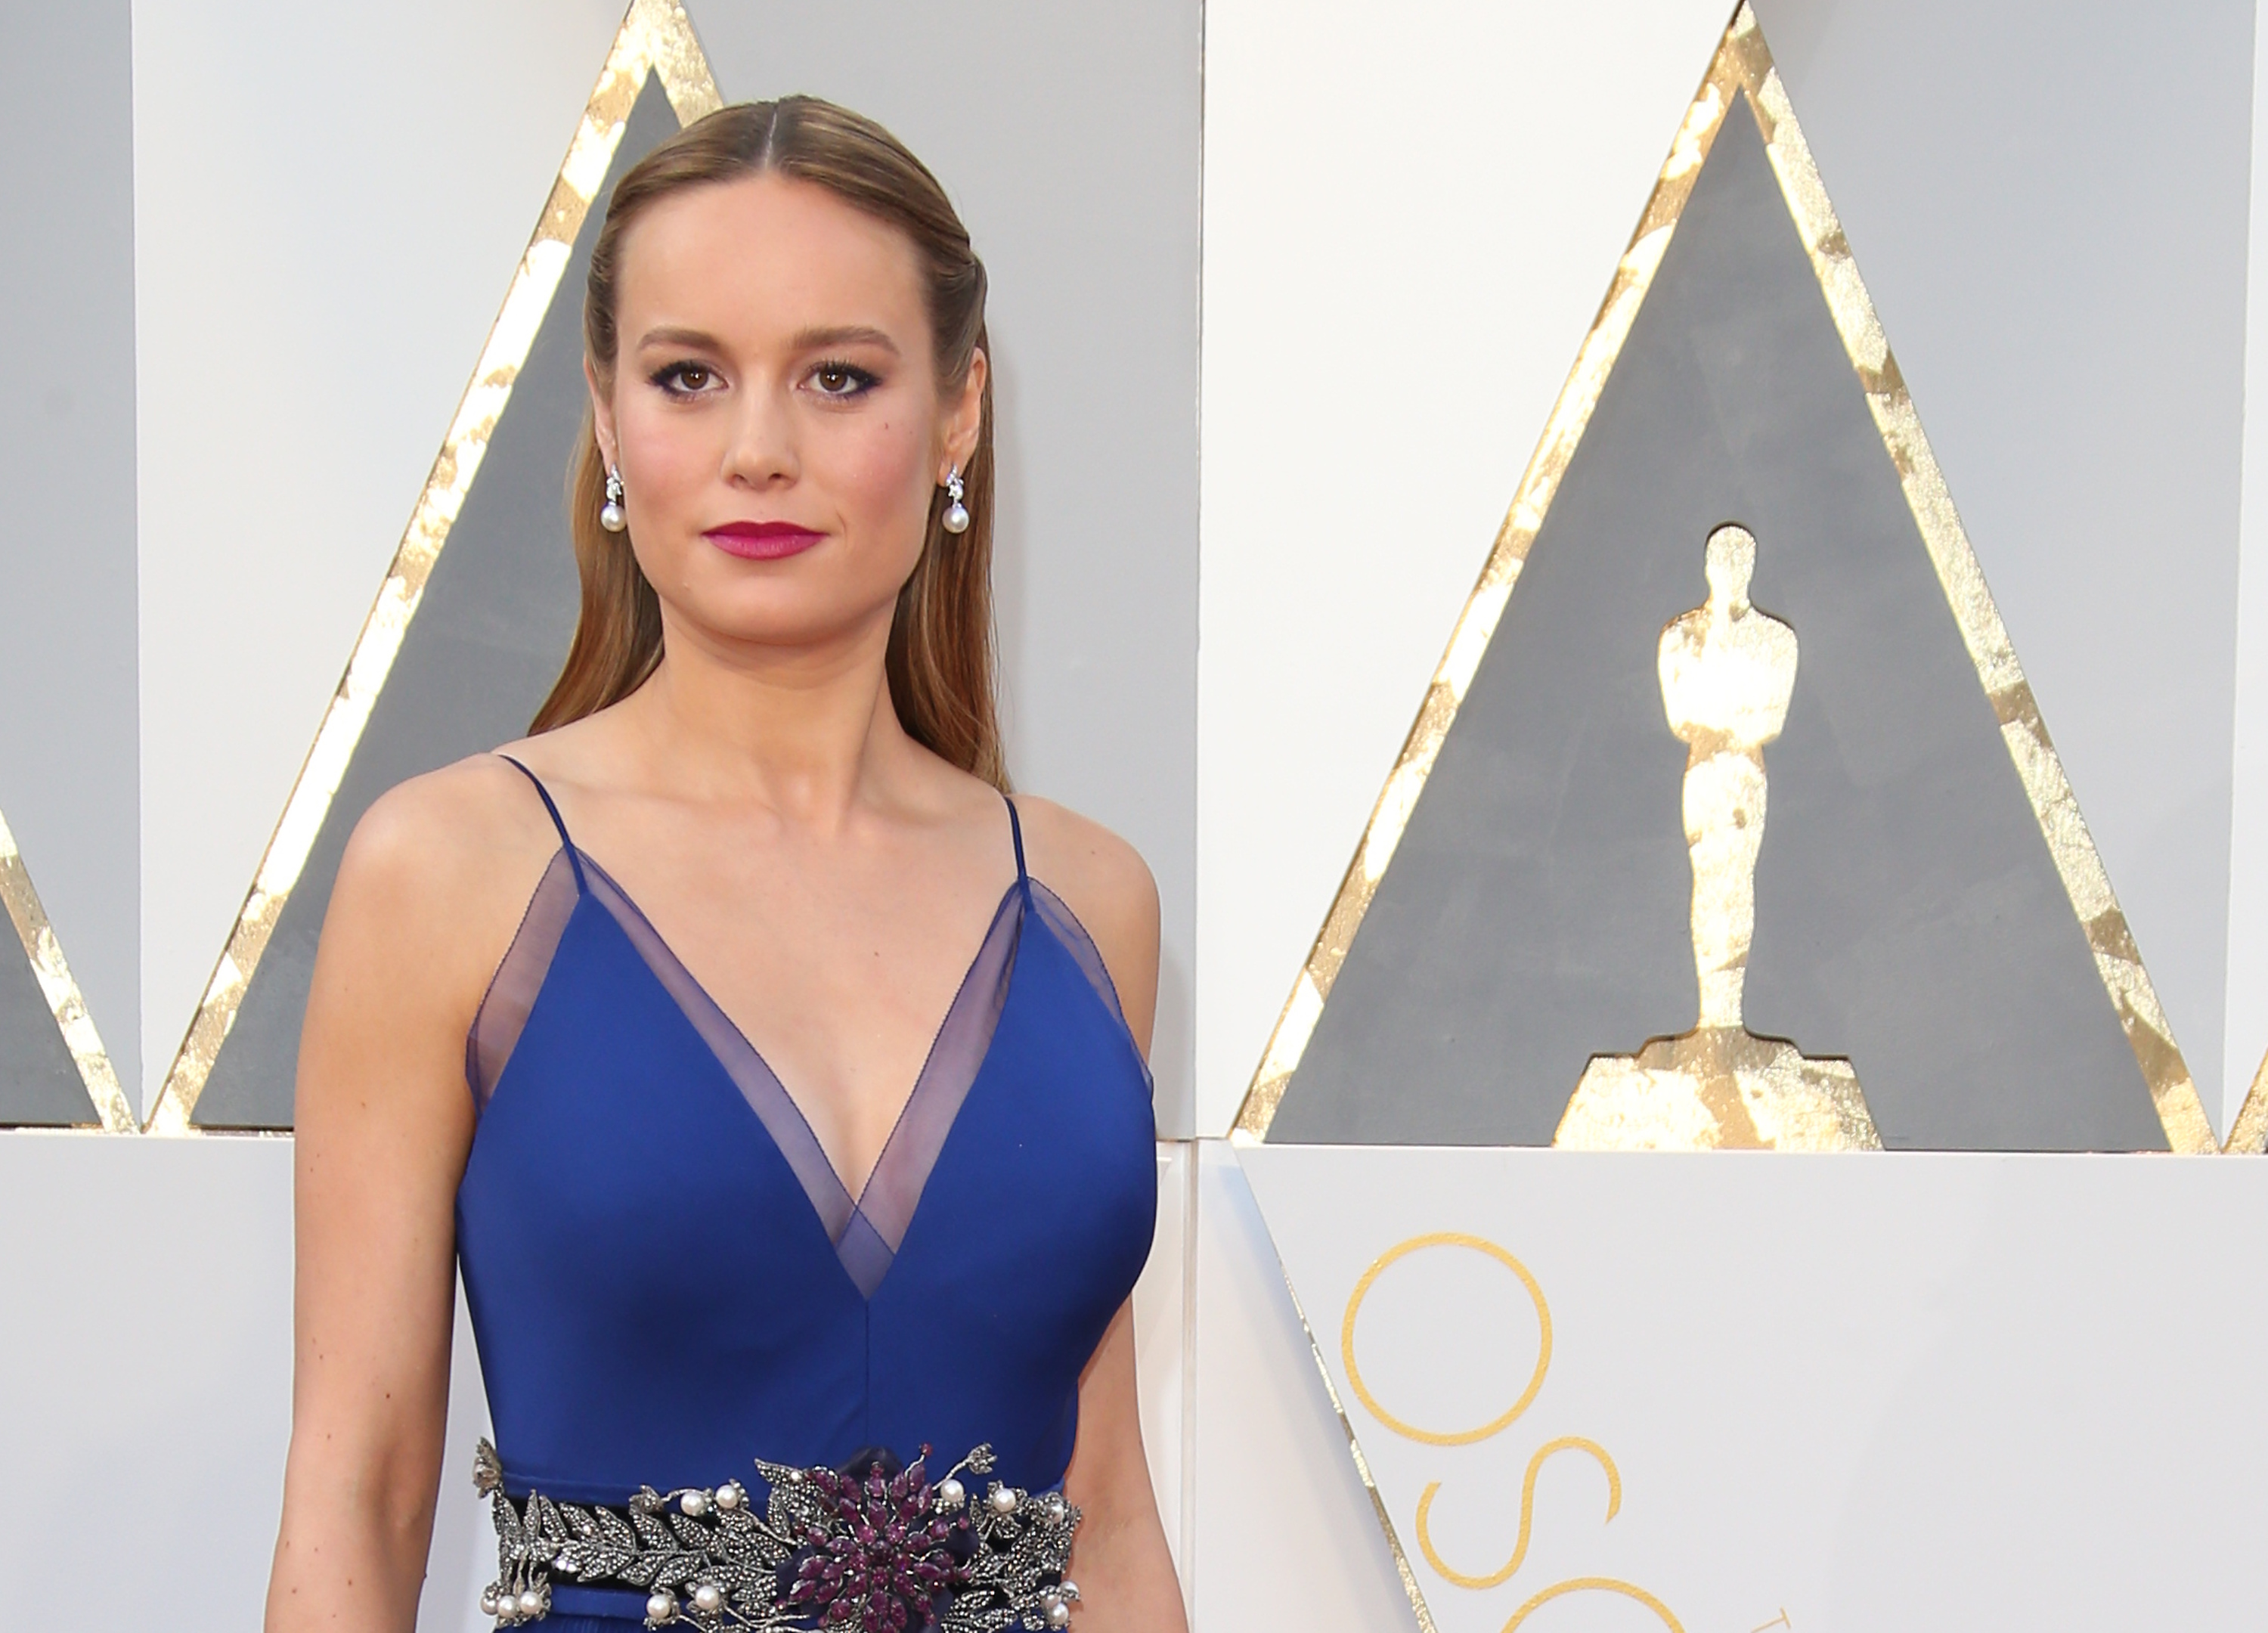 HOLLYWOOD, CA - FEBRUARY 28: Actress Brie Larson attends the 88th Annual Academy Awards at Hollywood & Highland Center on February 28, 2016 in Hollywood, California. (Photo by Dan MacMedan/WireImage) (Dan MacMedan—WireImage/Getty Images)